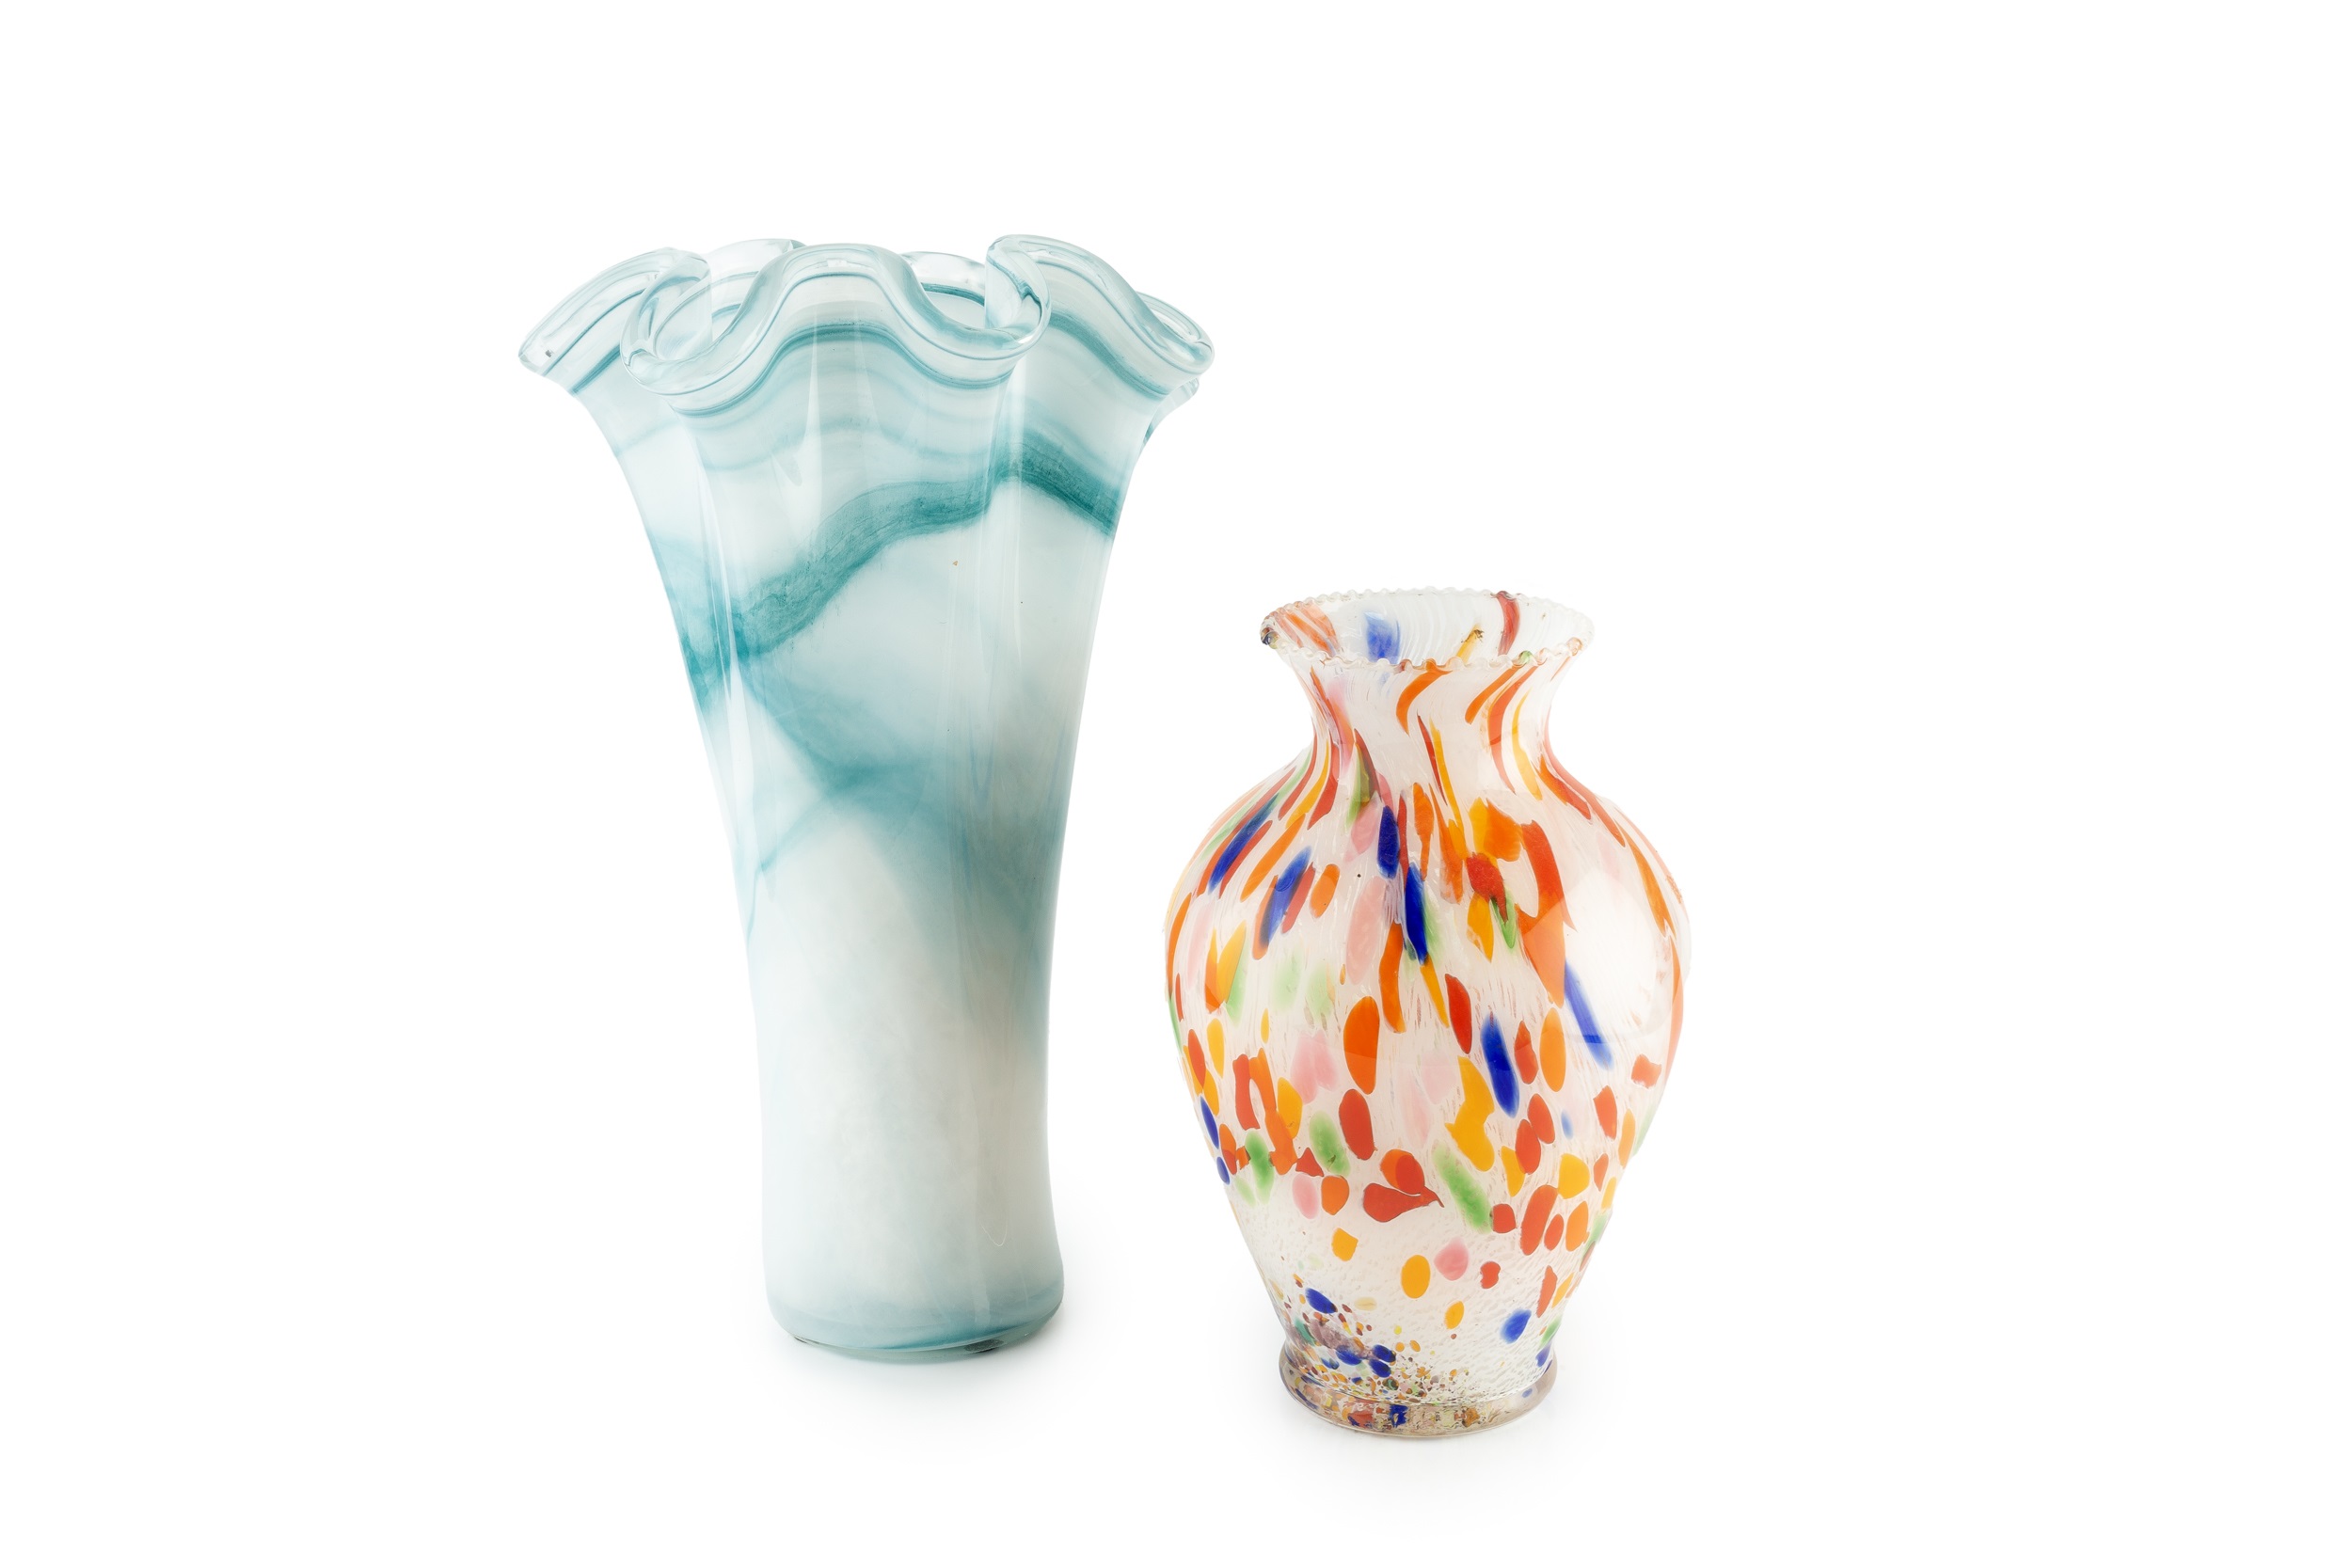 Art Glass Vases Handmade and mouth-blown 42cm and 30cm high (2).